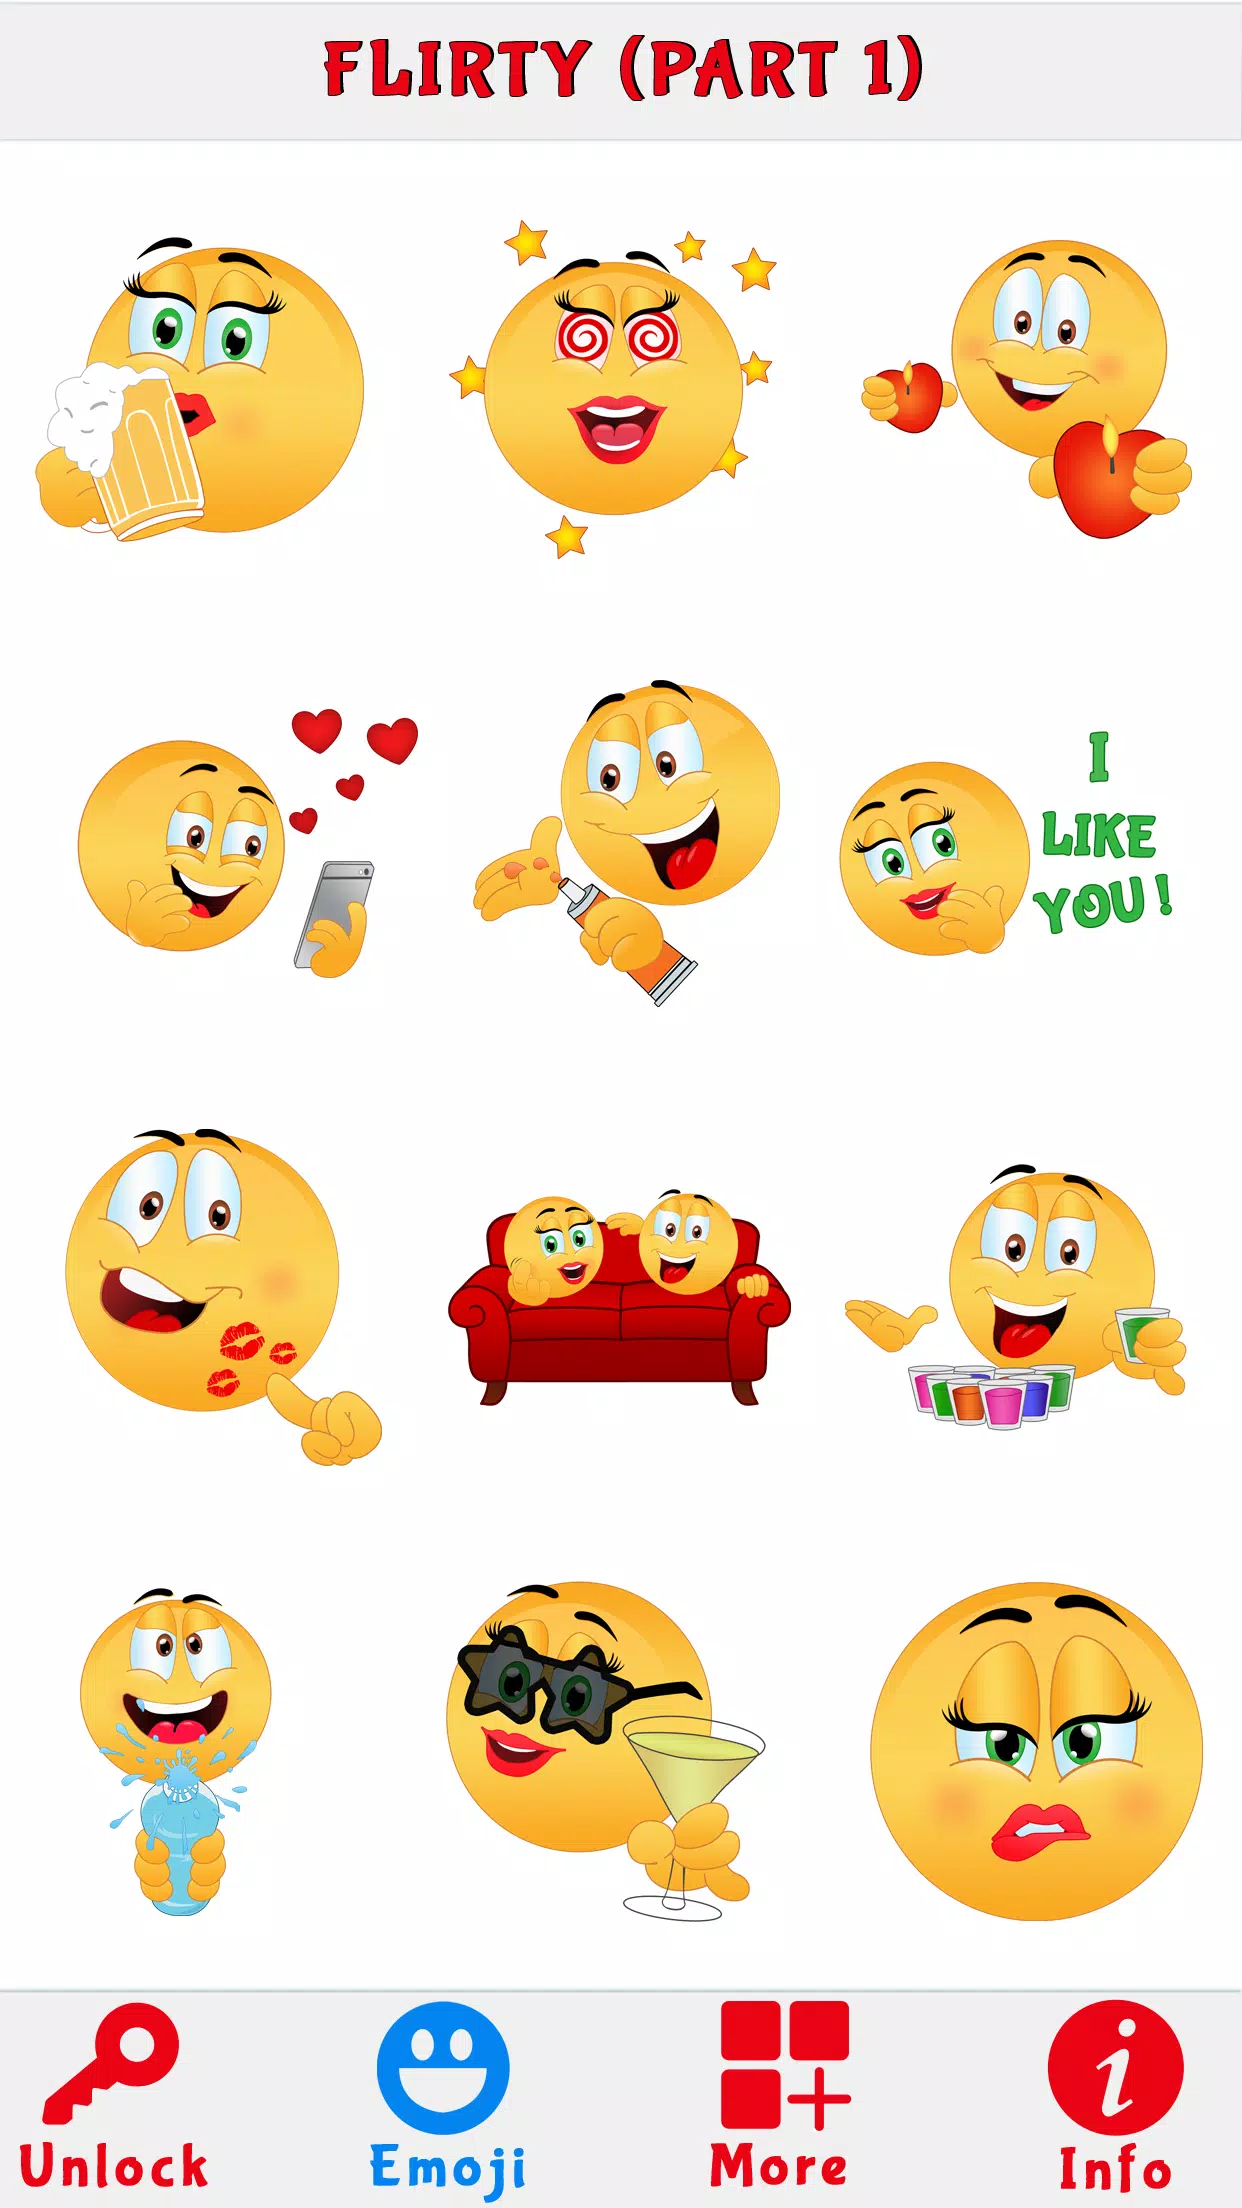 Sexy Smiley - Flirty Emoji â€“ Adult Icons and Dirty Stickers APK fÃ¼r Android herunterladen